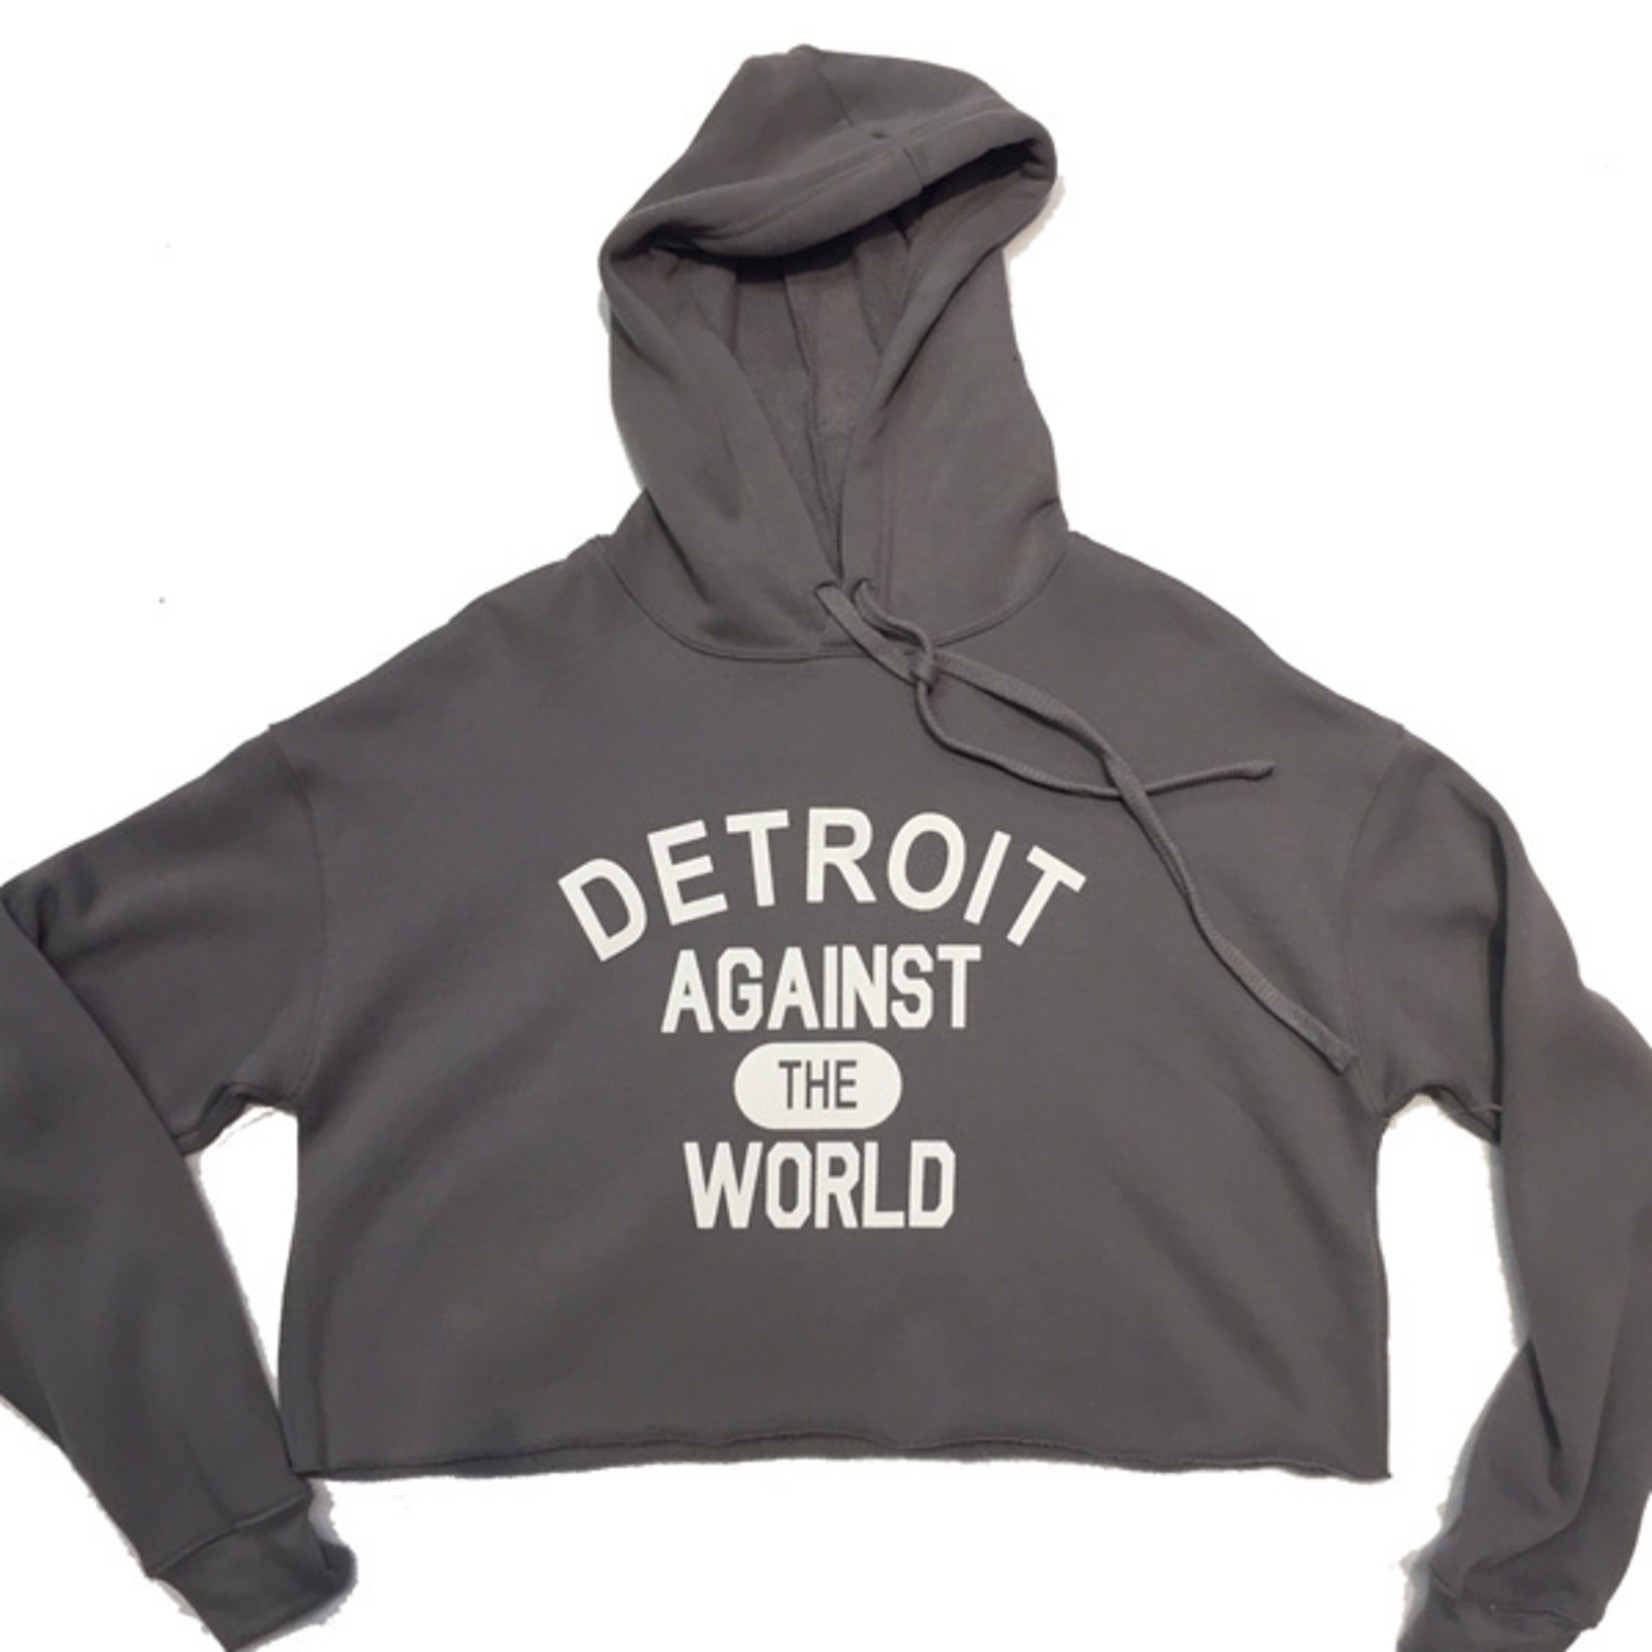 Corkys WOMEN'S DETROIT AGAINST THE WORLD CROP PULLOVER HOODIE